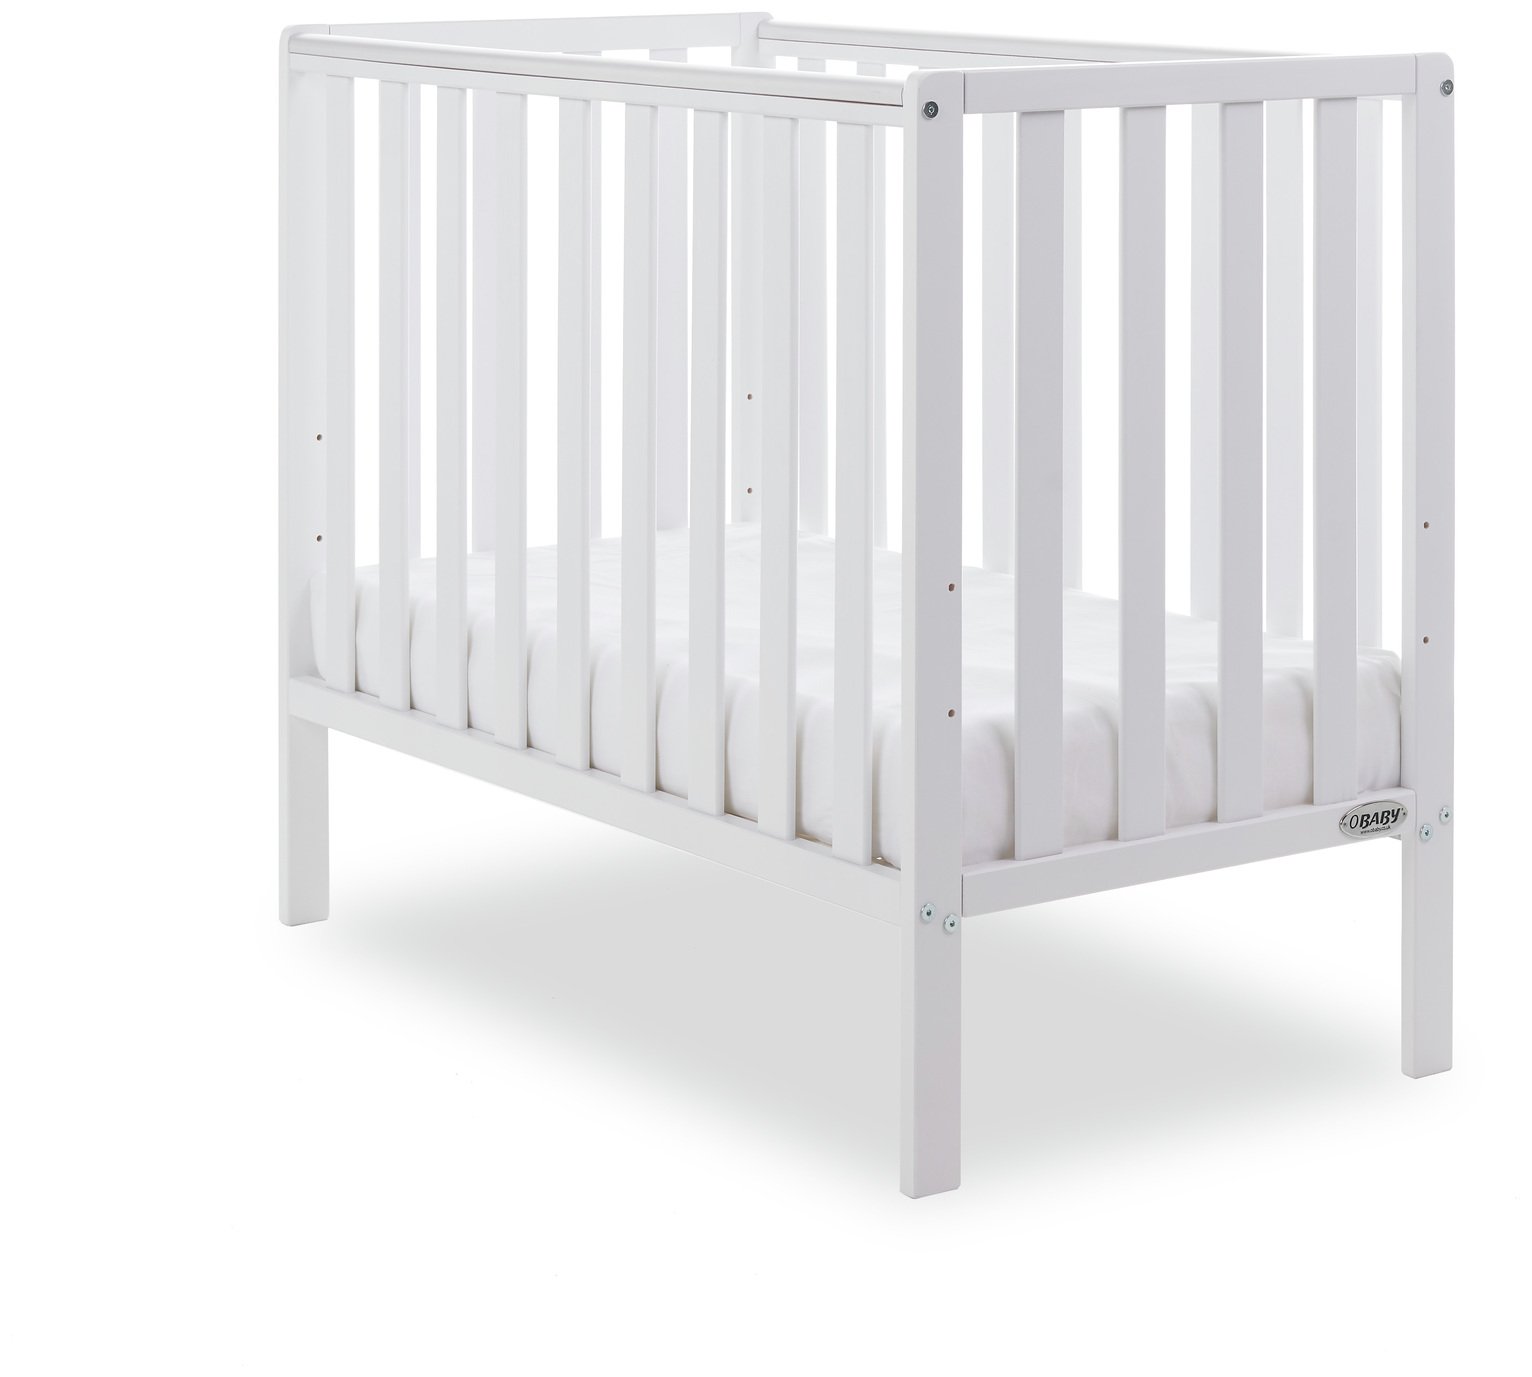 Obaby Bantam Space Saver Baby Cot with Mattress Review